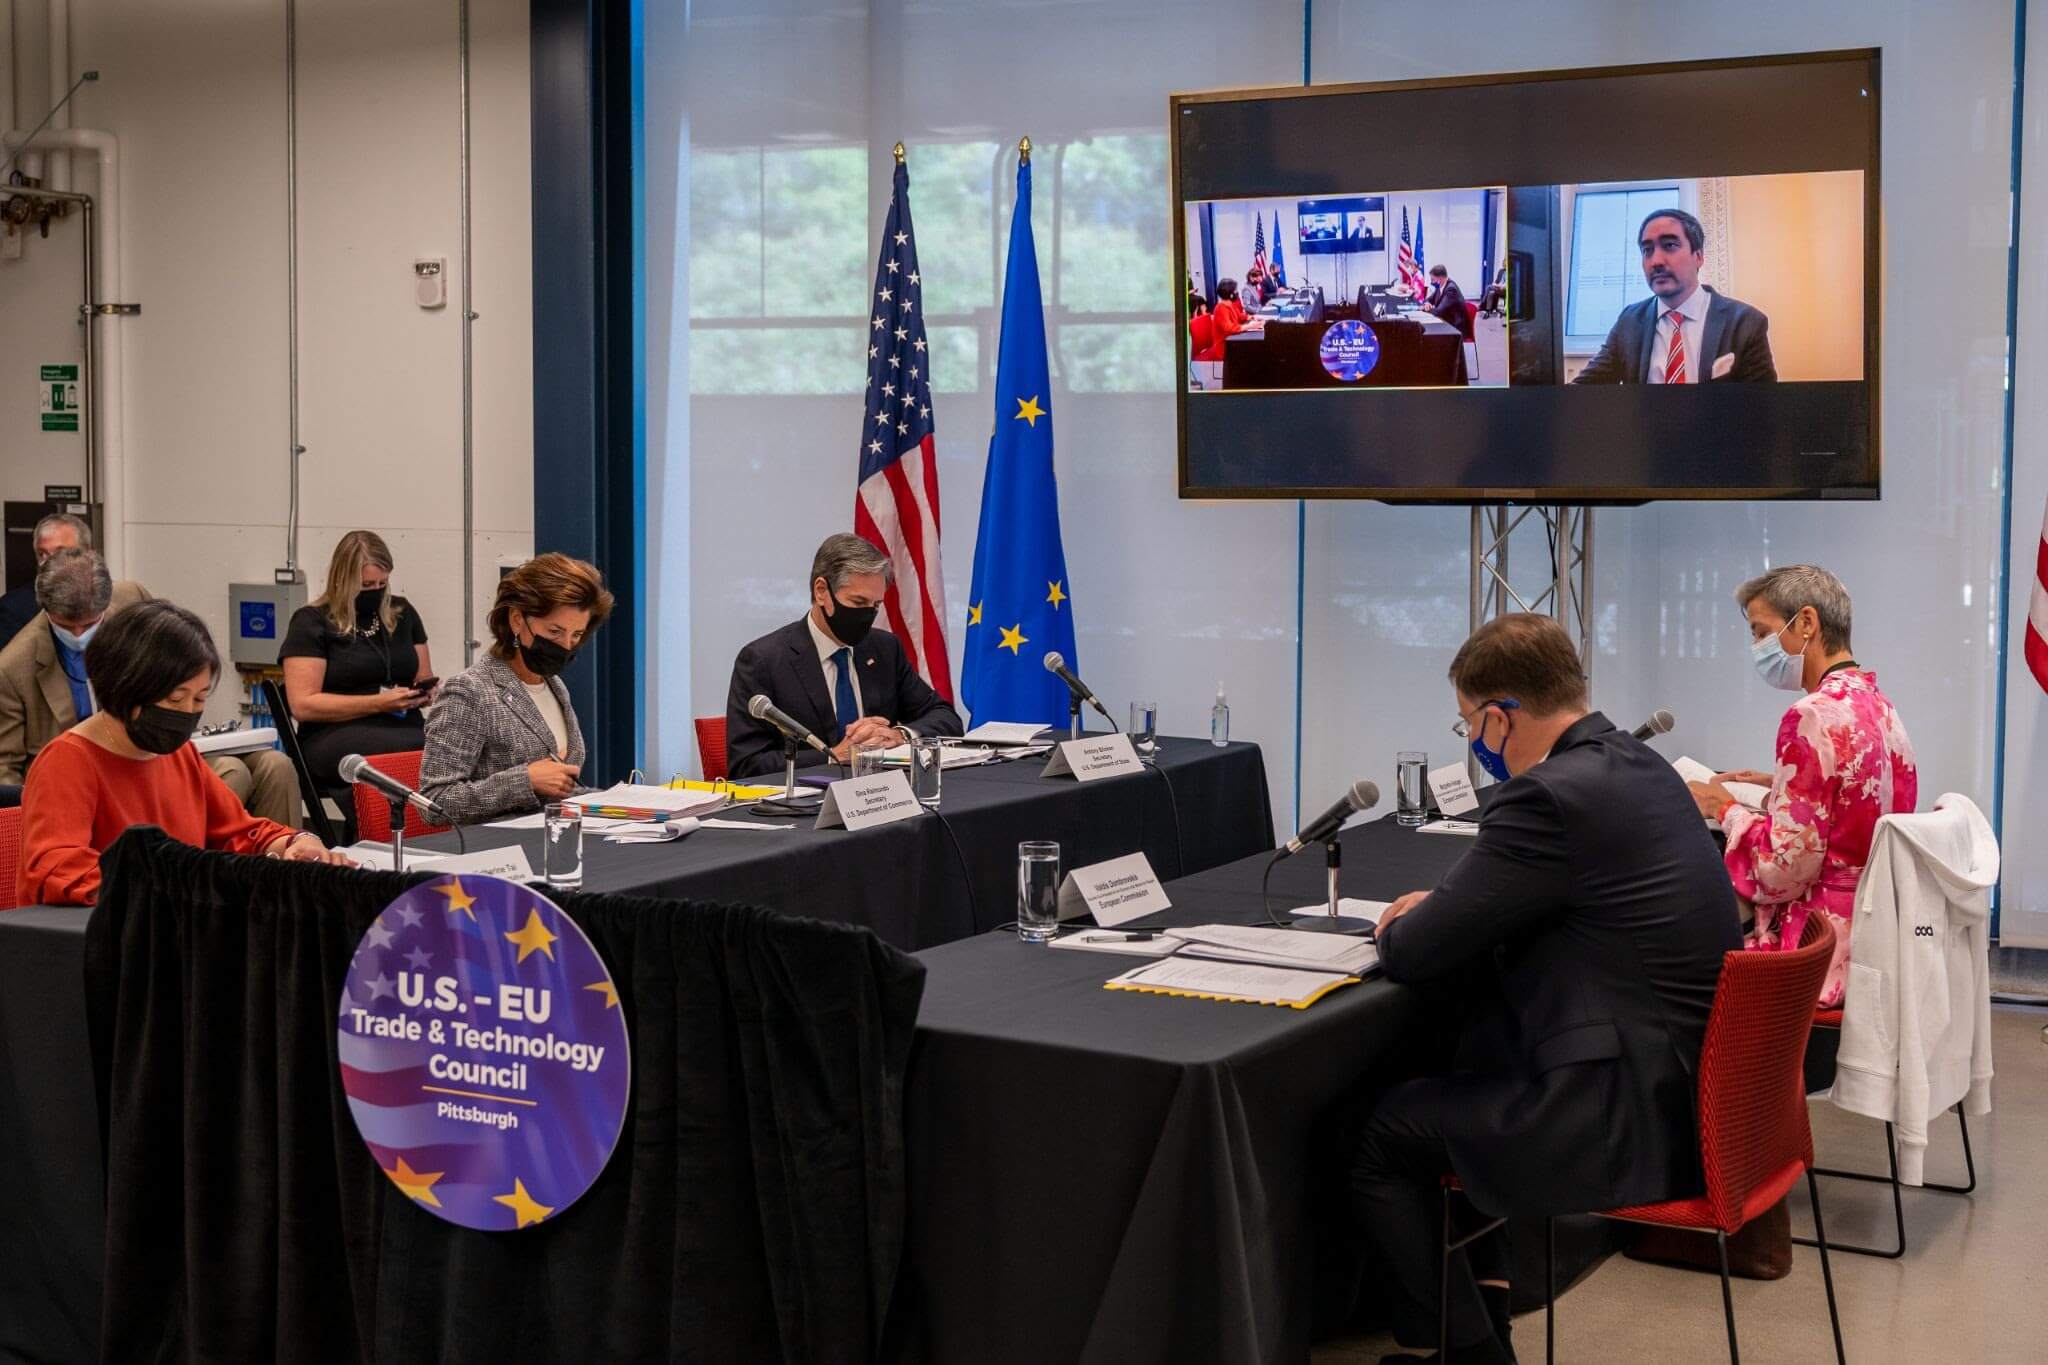 The inaugural US-EU Trade and Technology Council meeting in Pittsburgh, Pennsylvania on 29 September 2021 (from left): US Trade Representative Katherine Tai, Secretary of Commerce Gina Raimondo, Secretary of State Antony J. Blinken, and European Commission Executive Vice Presidents Margrethe Vestager and Valdis Dombrovskis.